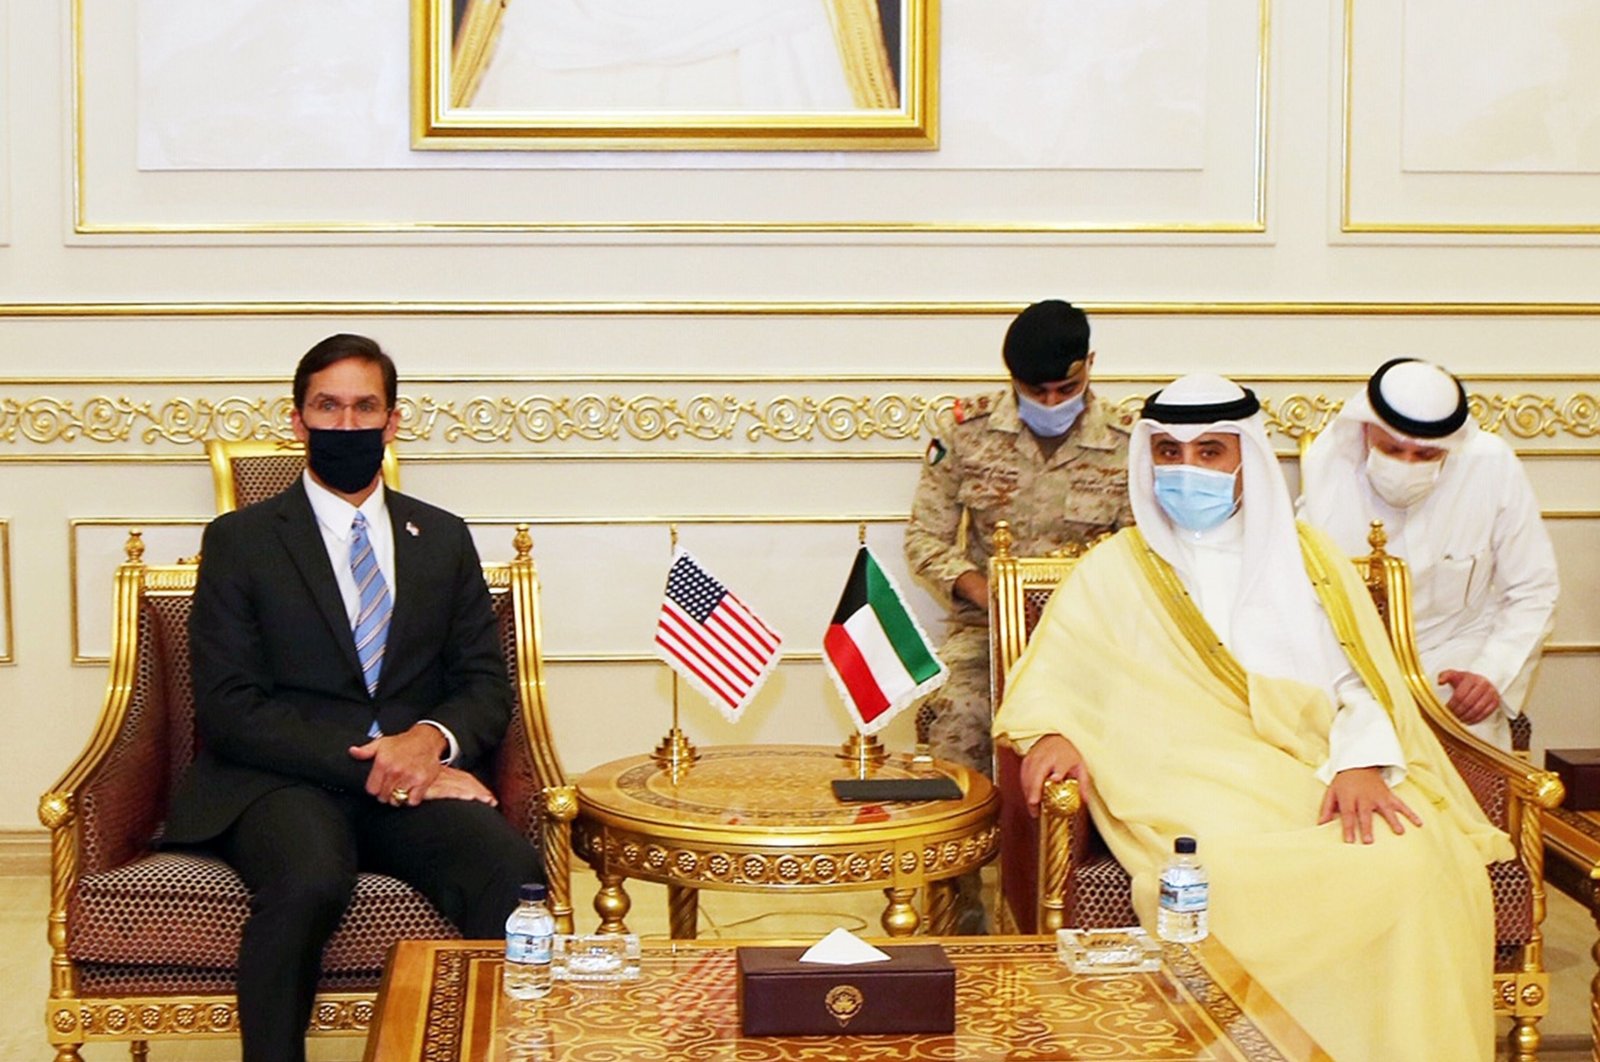 A handout picture released by the Kuwaiti Emiri Diwan shows Foreign Minister Ahmad Nasser al-Sabah (R) receiving U.S. Defense Secretary Mark Esper at the emiri terminal of the Kuwait international airport in the capital Kuwait City on Oct. 4, 2020. (Photo by Emir of Kuwait Diwan / AFP)